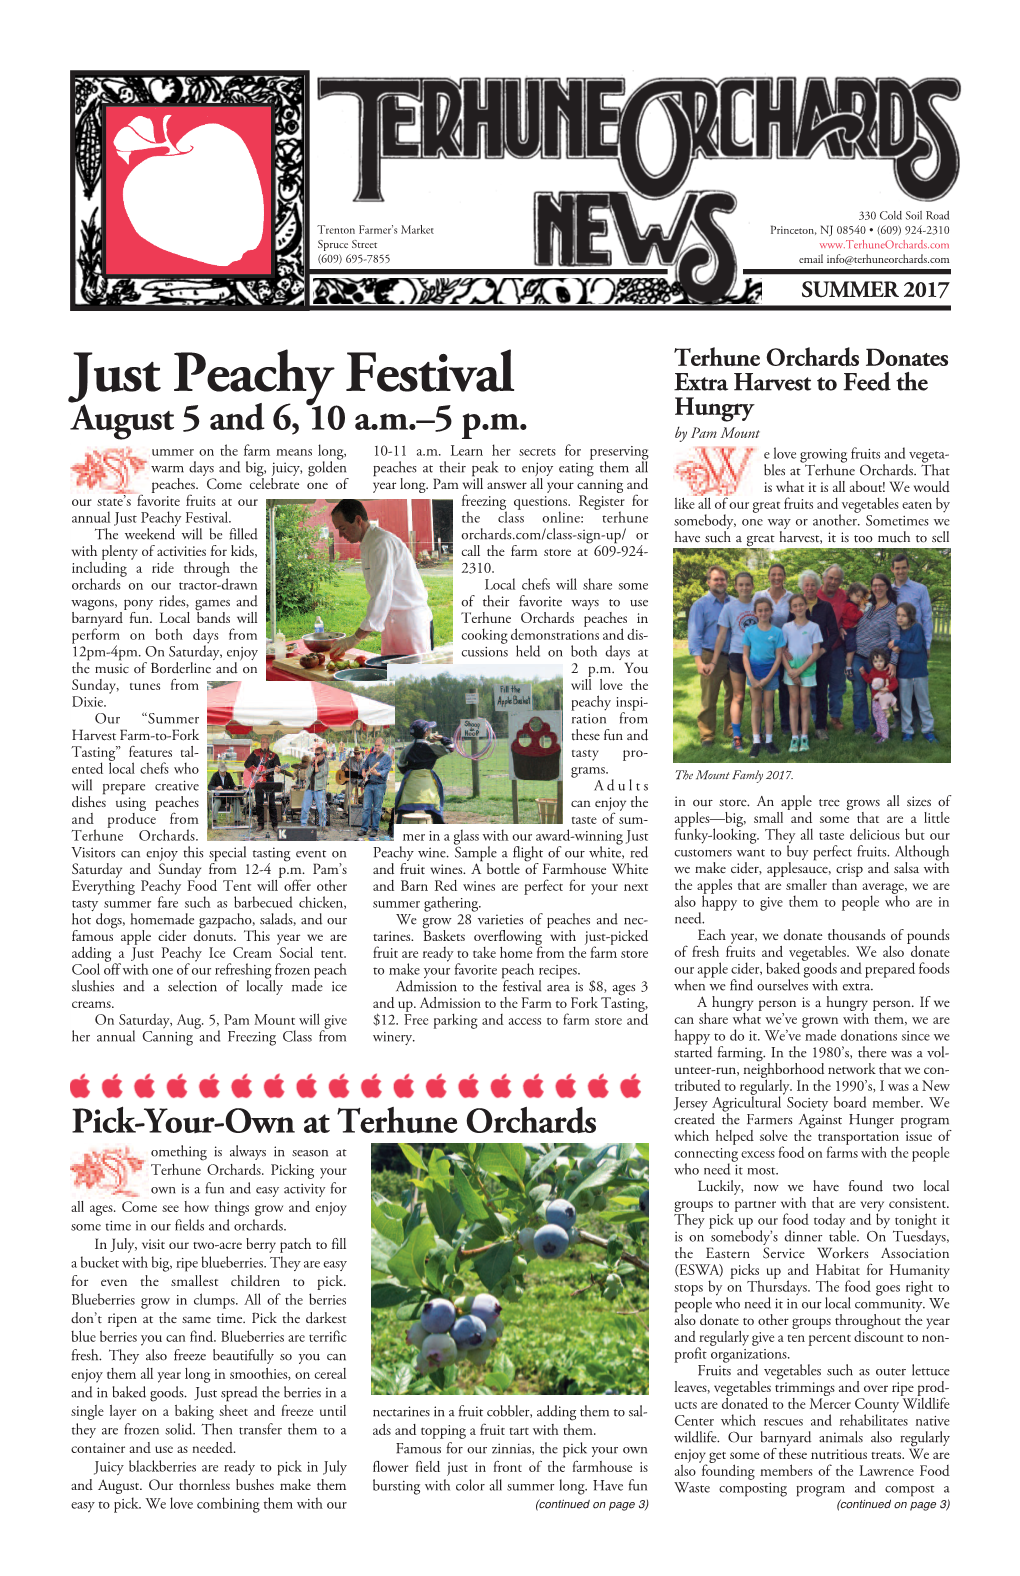 Just Peachy Festival Extra Harvest to Feed the Hungry August 5 and 6, 10 A.M.–5 P.M